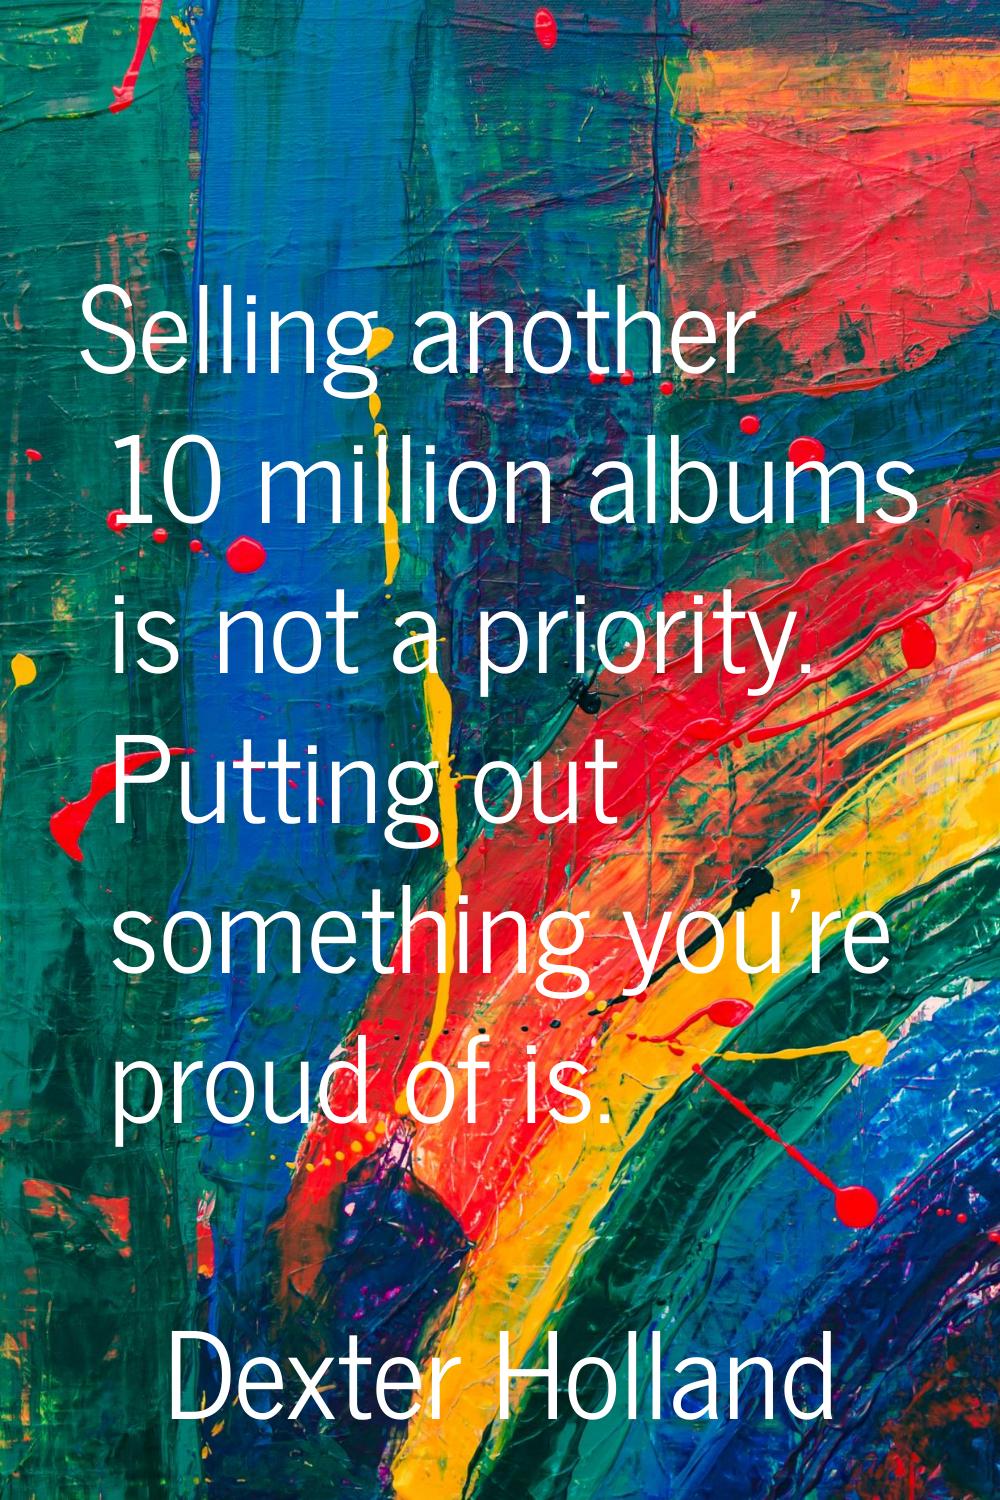 Selling another 10 million albums is not a priority. Putting out something you're proud of is.